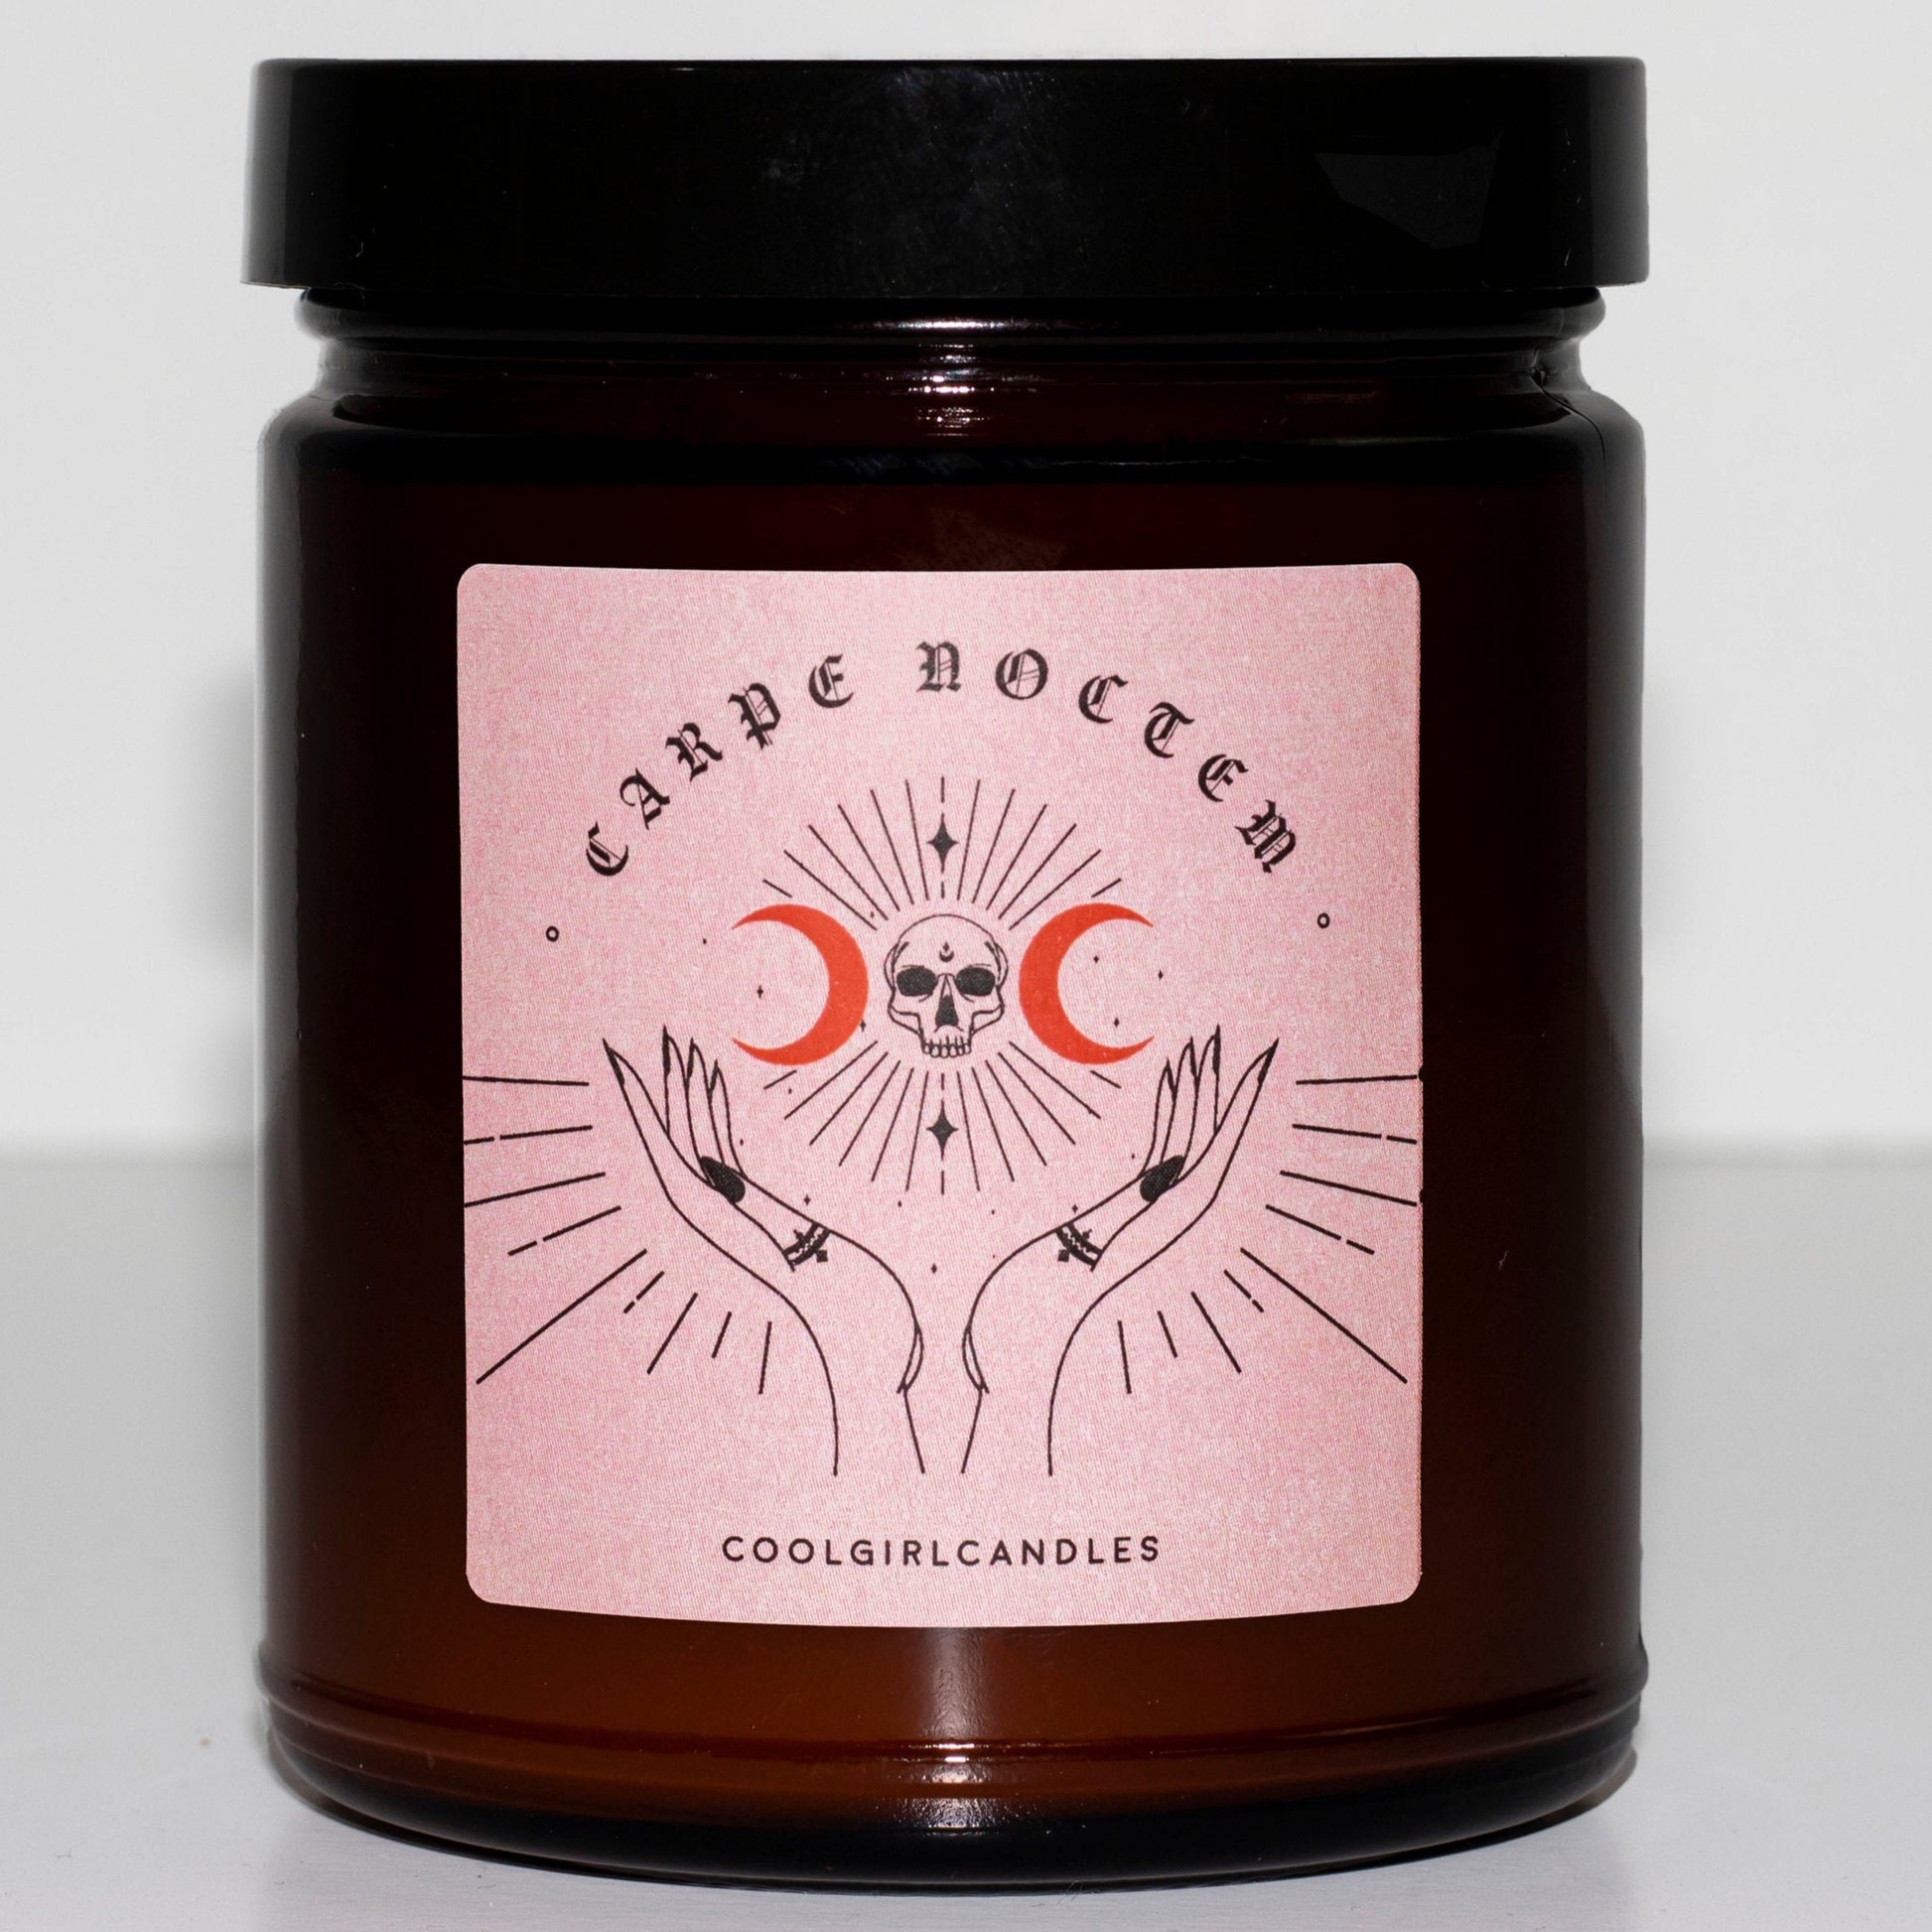 Fall 2020 candle with bergamot, lavender, and black pepper